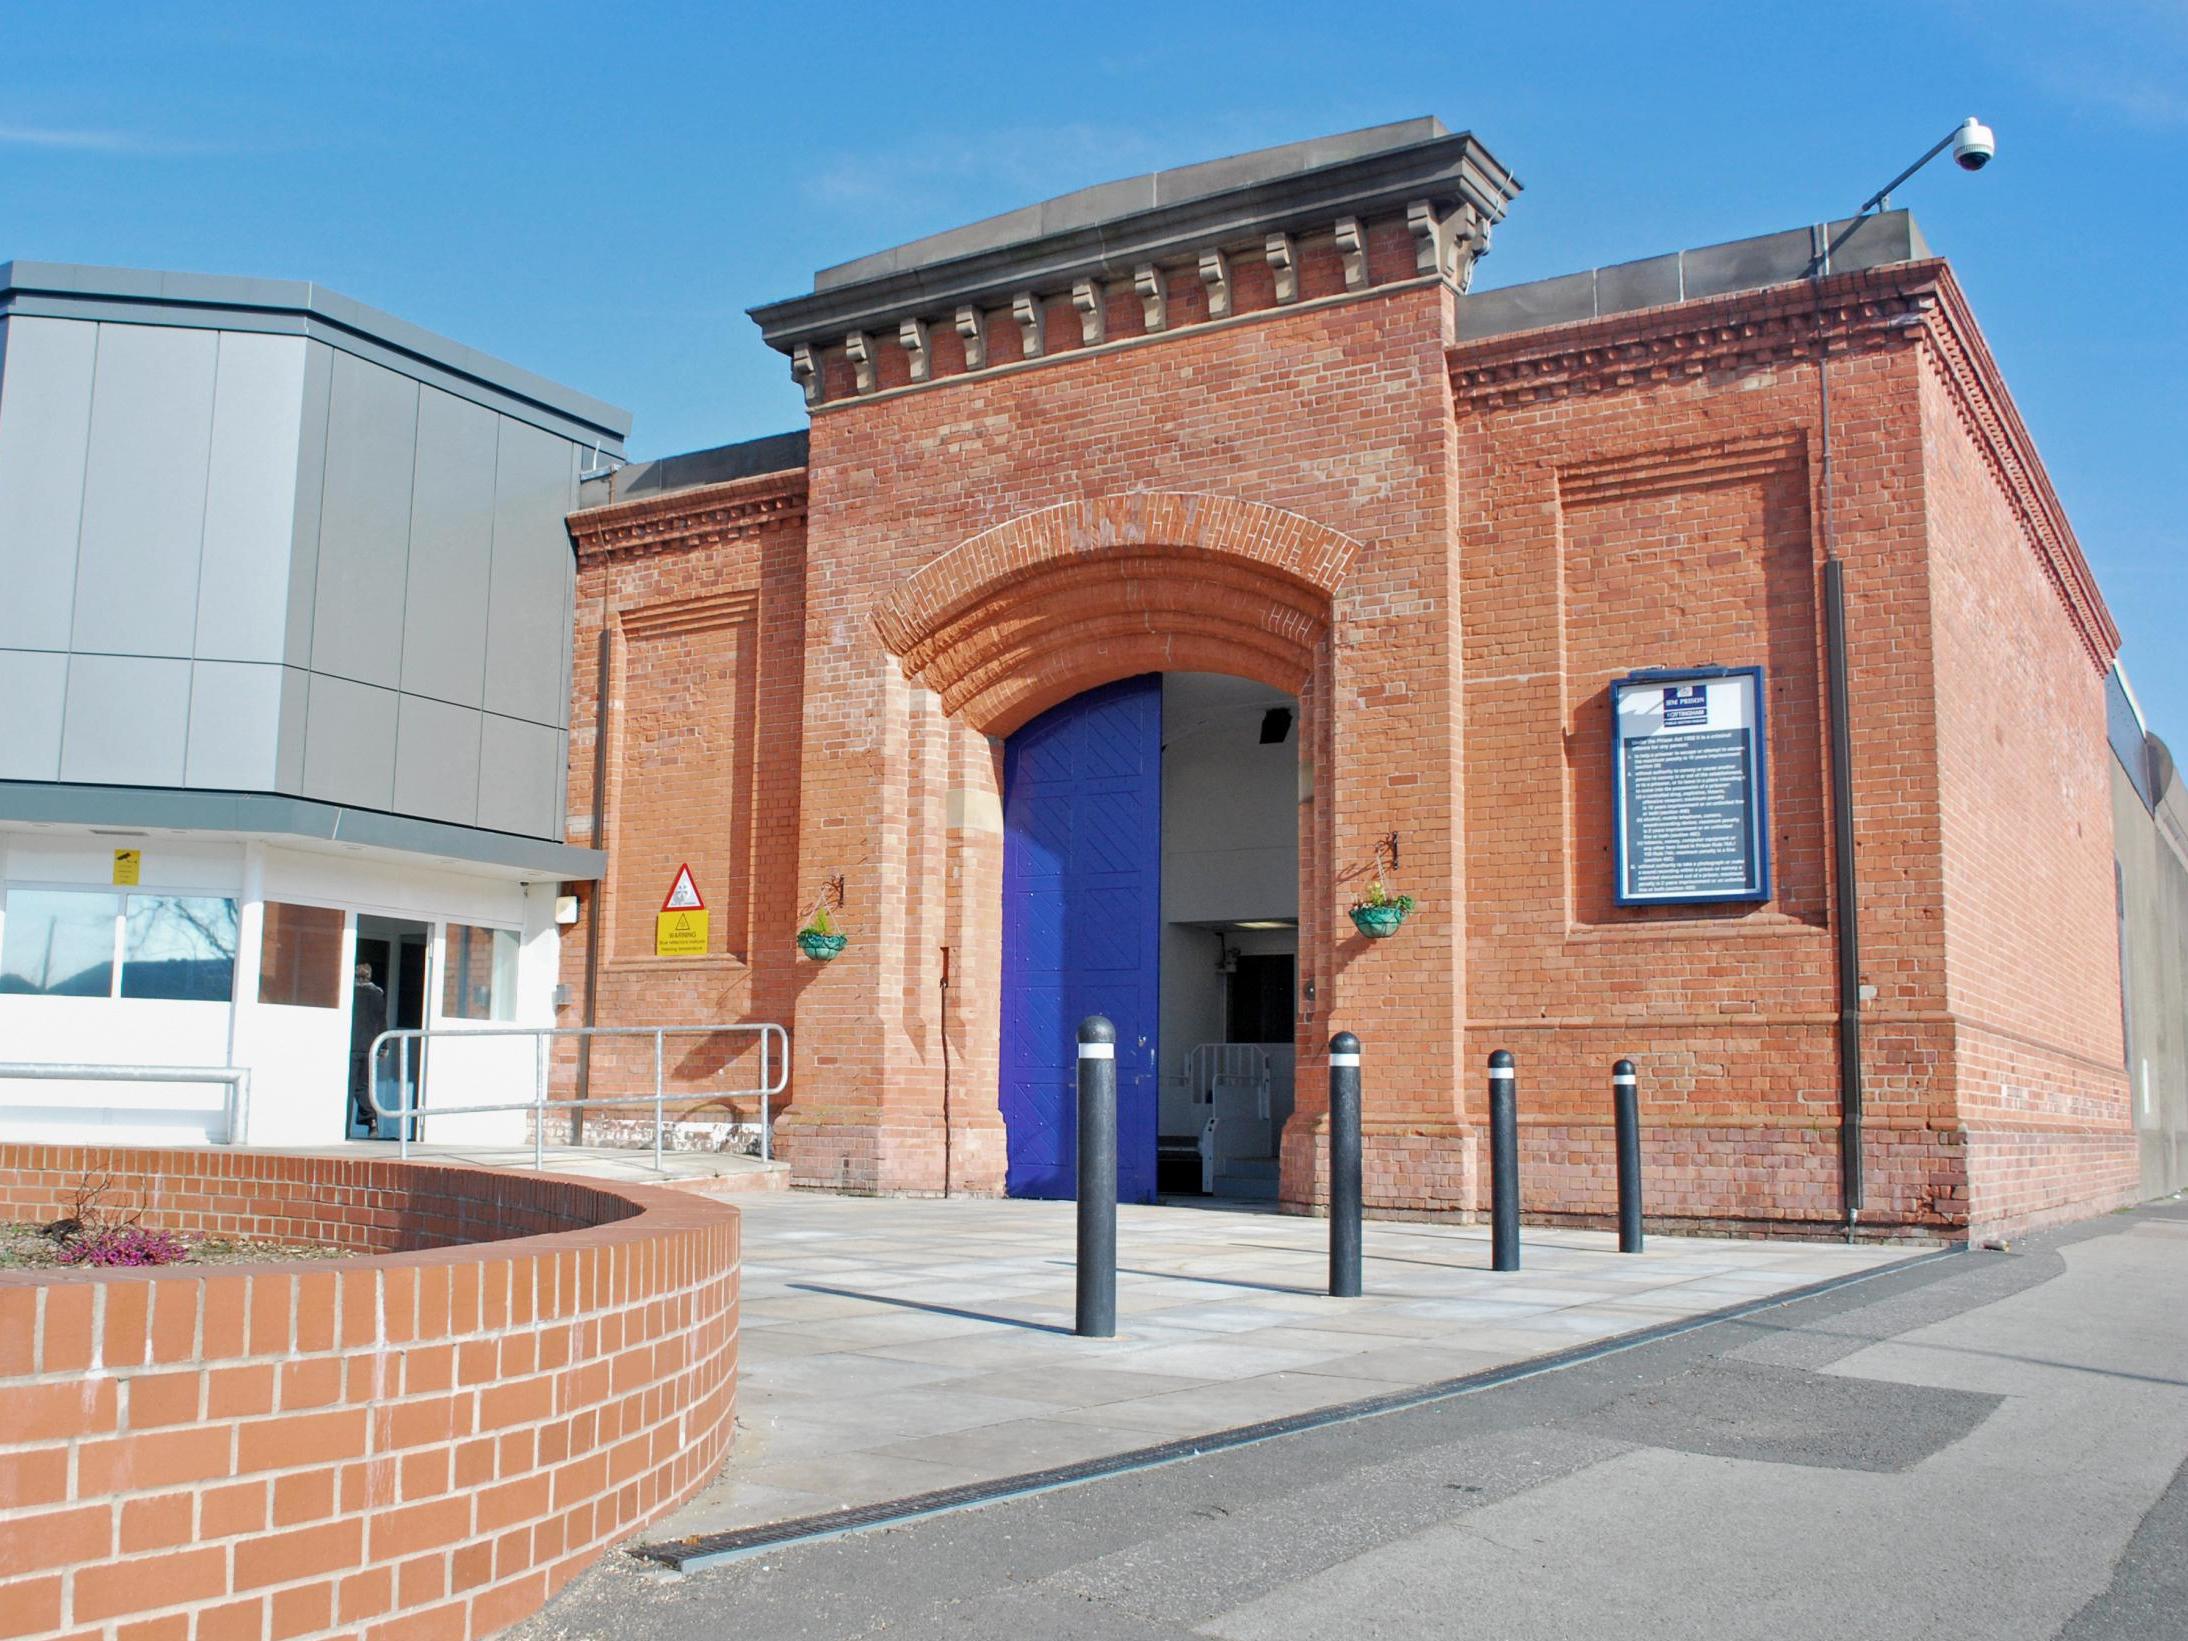 Prison officer has 'throat cut' by inmate at HMP Nottingham